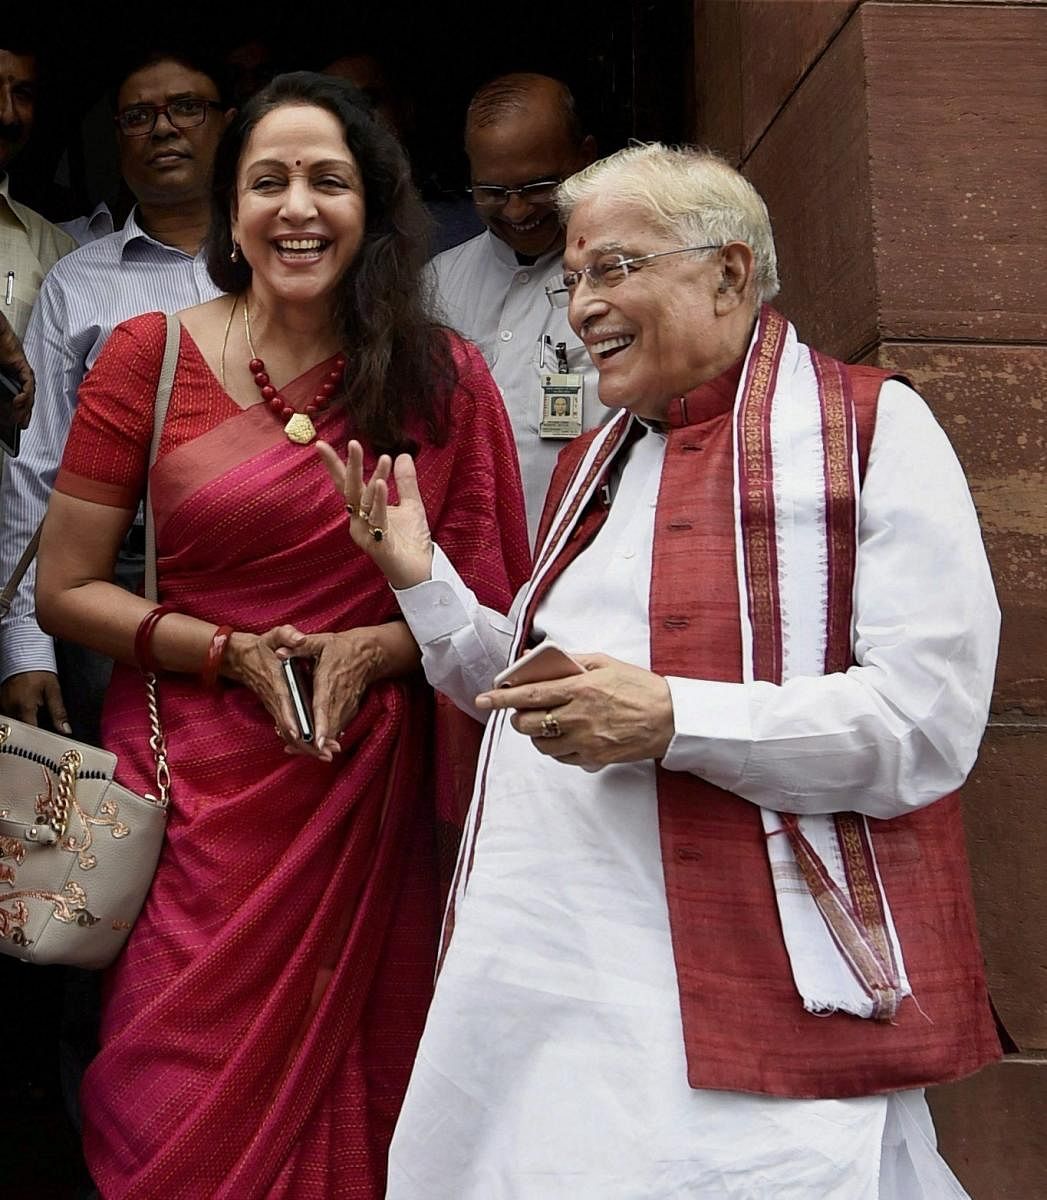 BJP MPs Murli Manohar Joshi and Hema Malini at Parliament house during the ongoing monsoon session in New Delhi. PTI FILE PHOTO